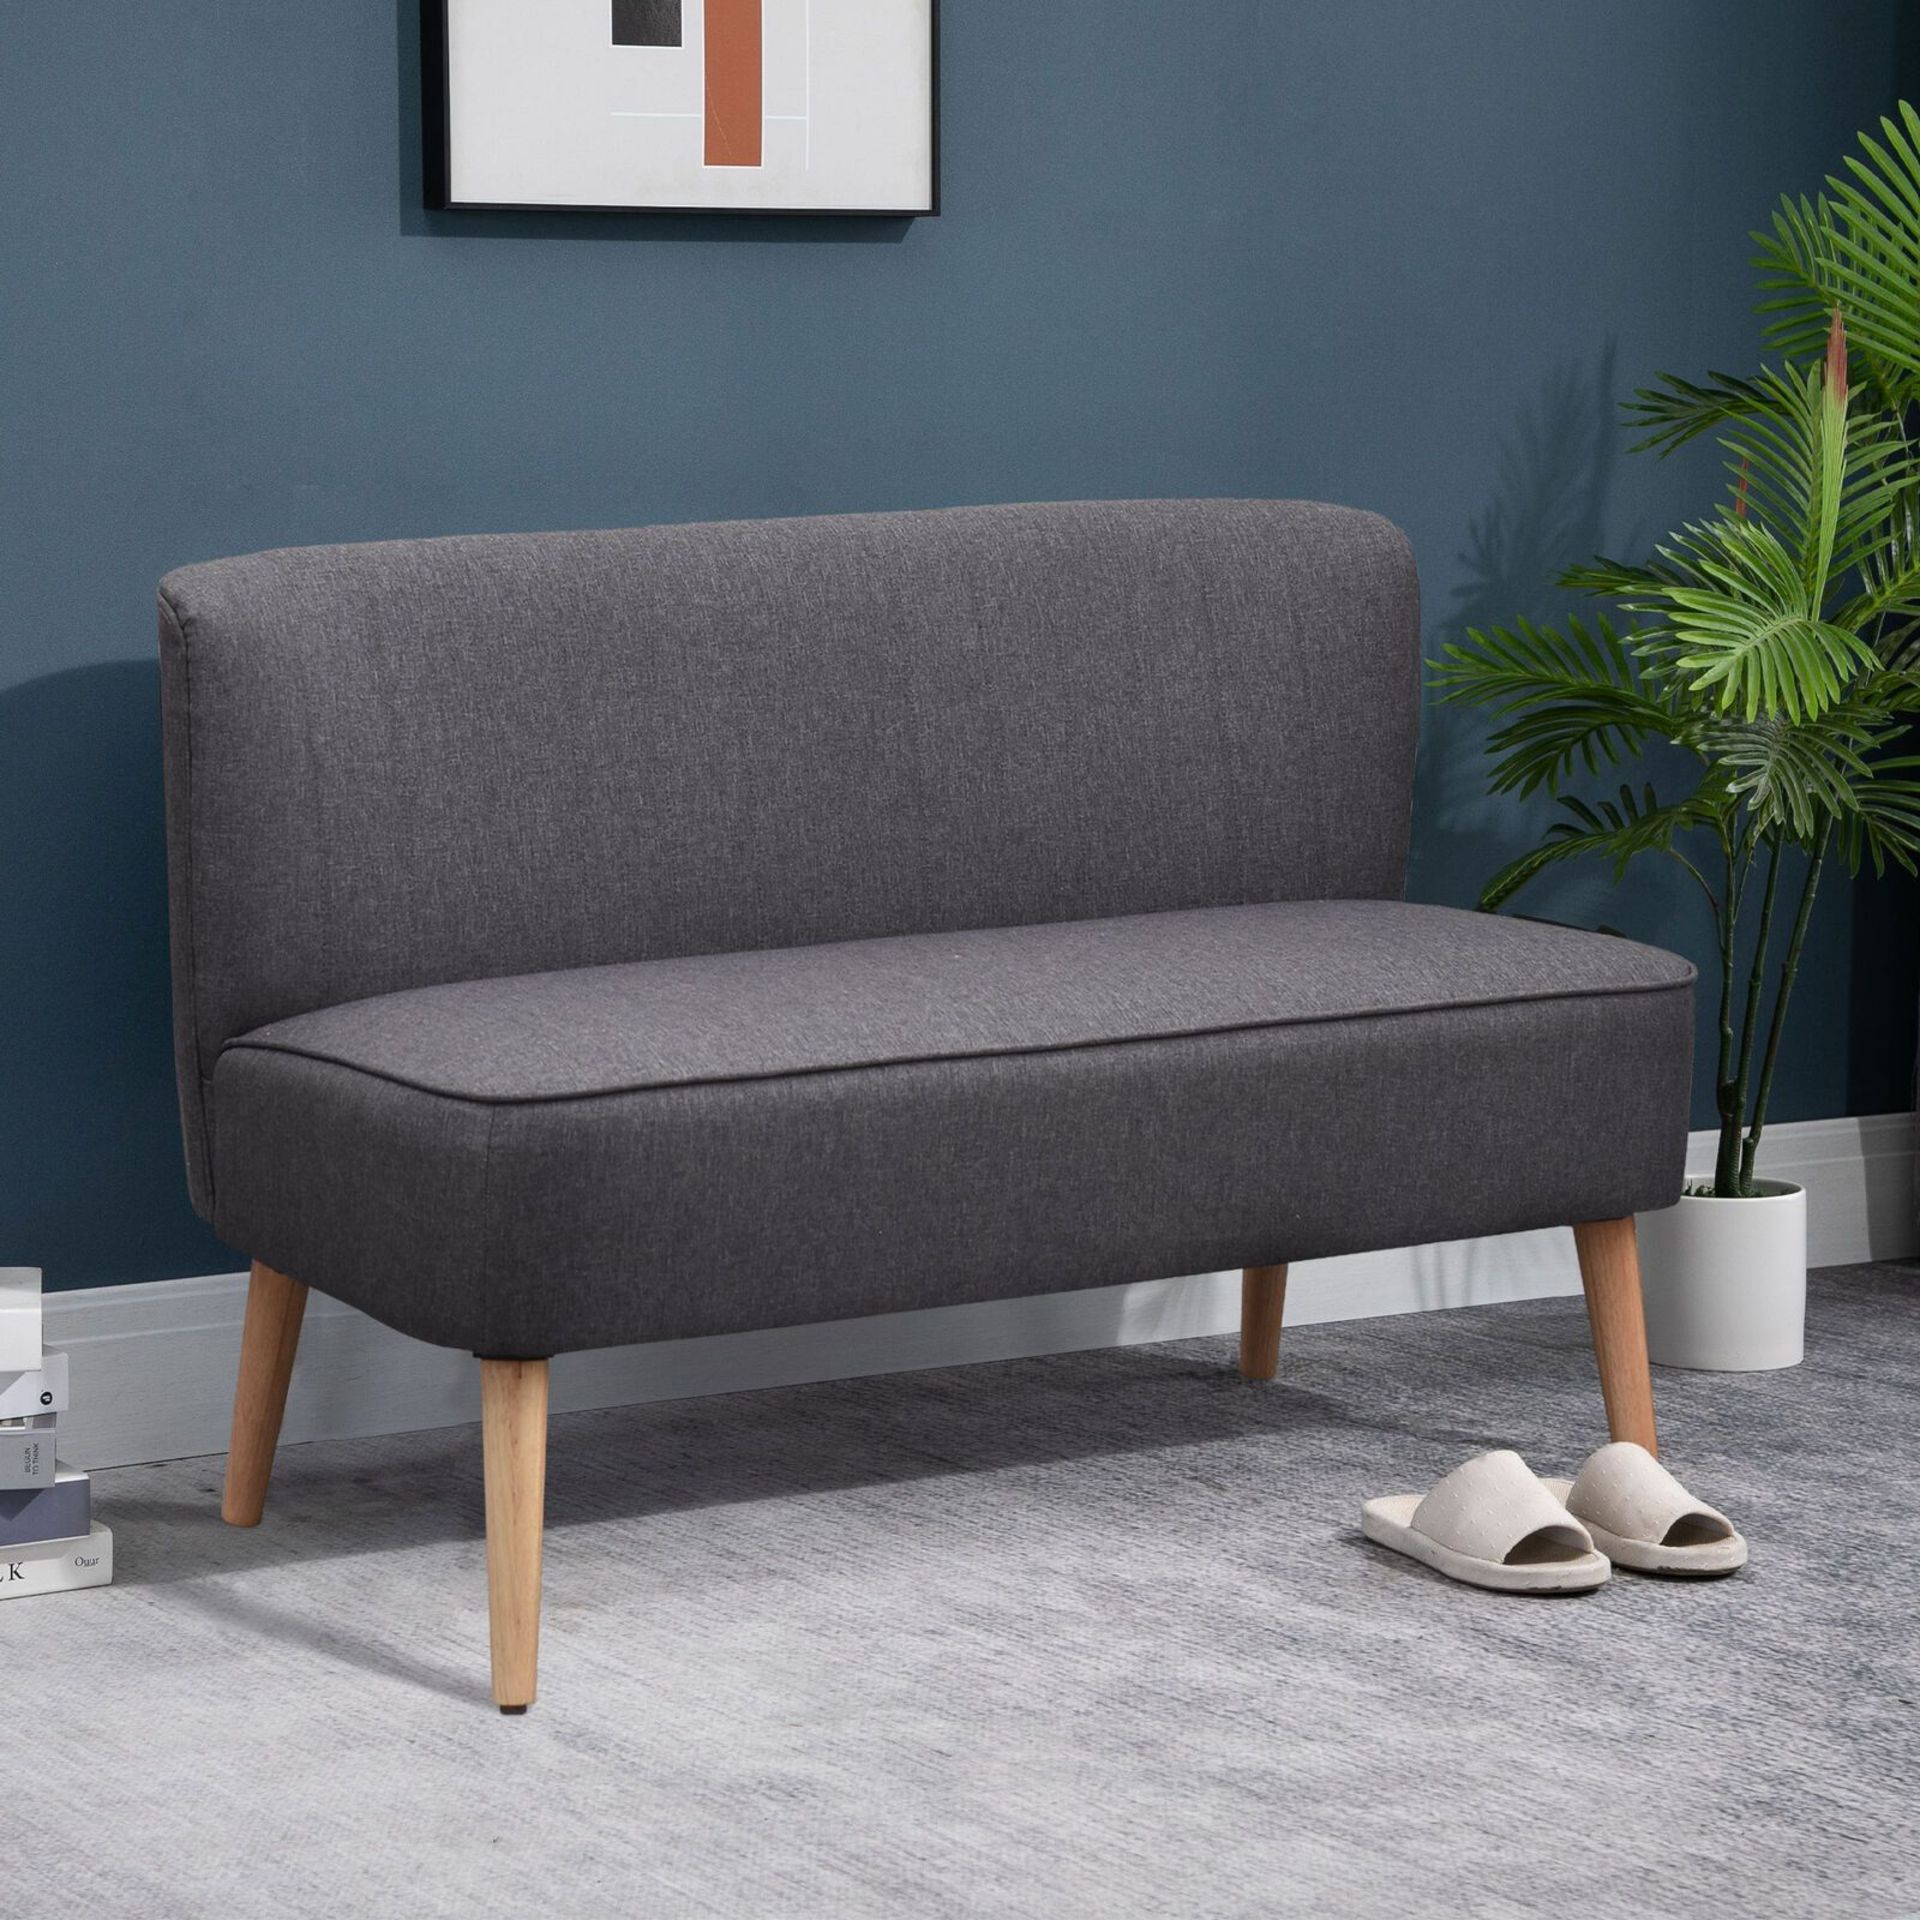 Modern Double Seat Sofa Loveseat Couch Padded Linen Wood Legs, Dark Grey. - R13a.4. This